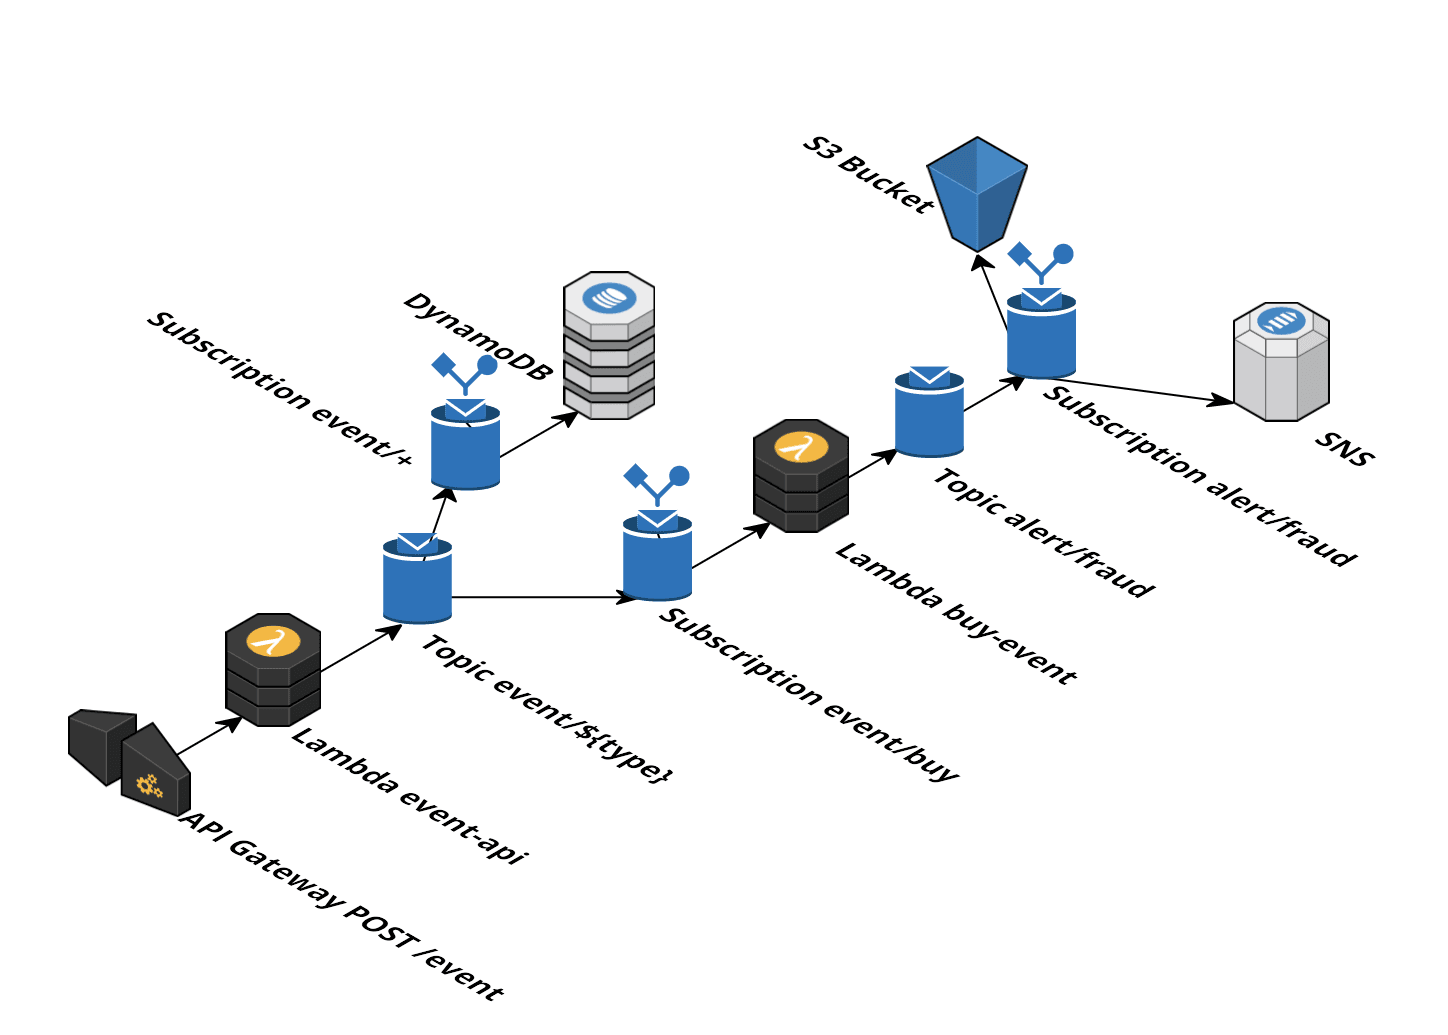 Designing asynchronous event systems with AWS IoT and Serverless Application Model (SAM)